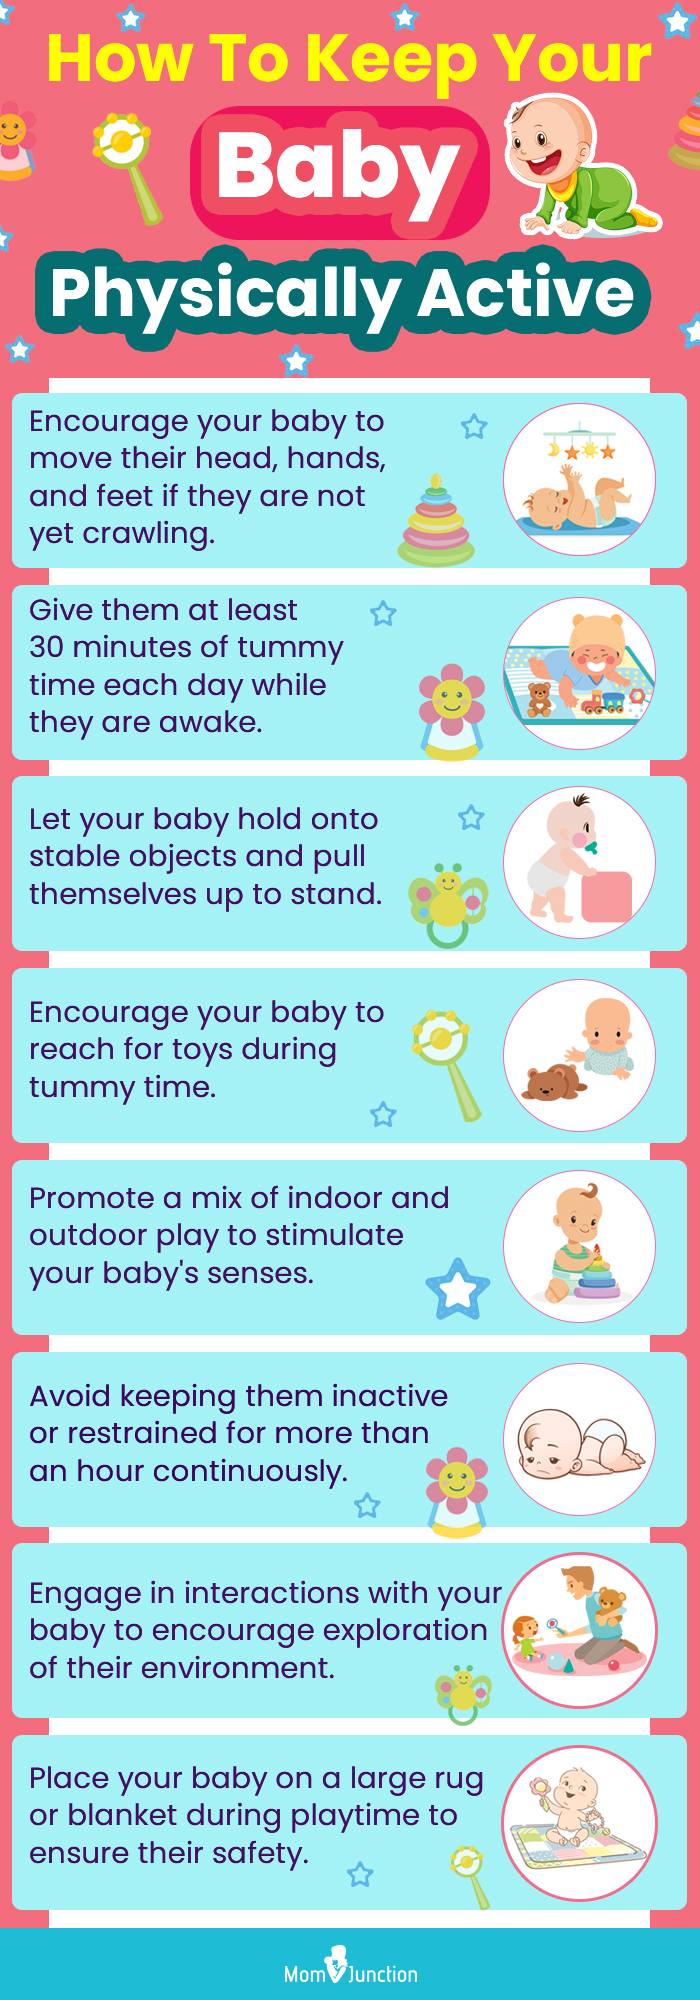 how to keep your baby physically active (infographic)